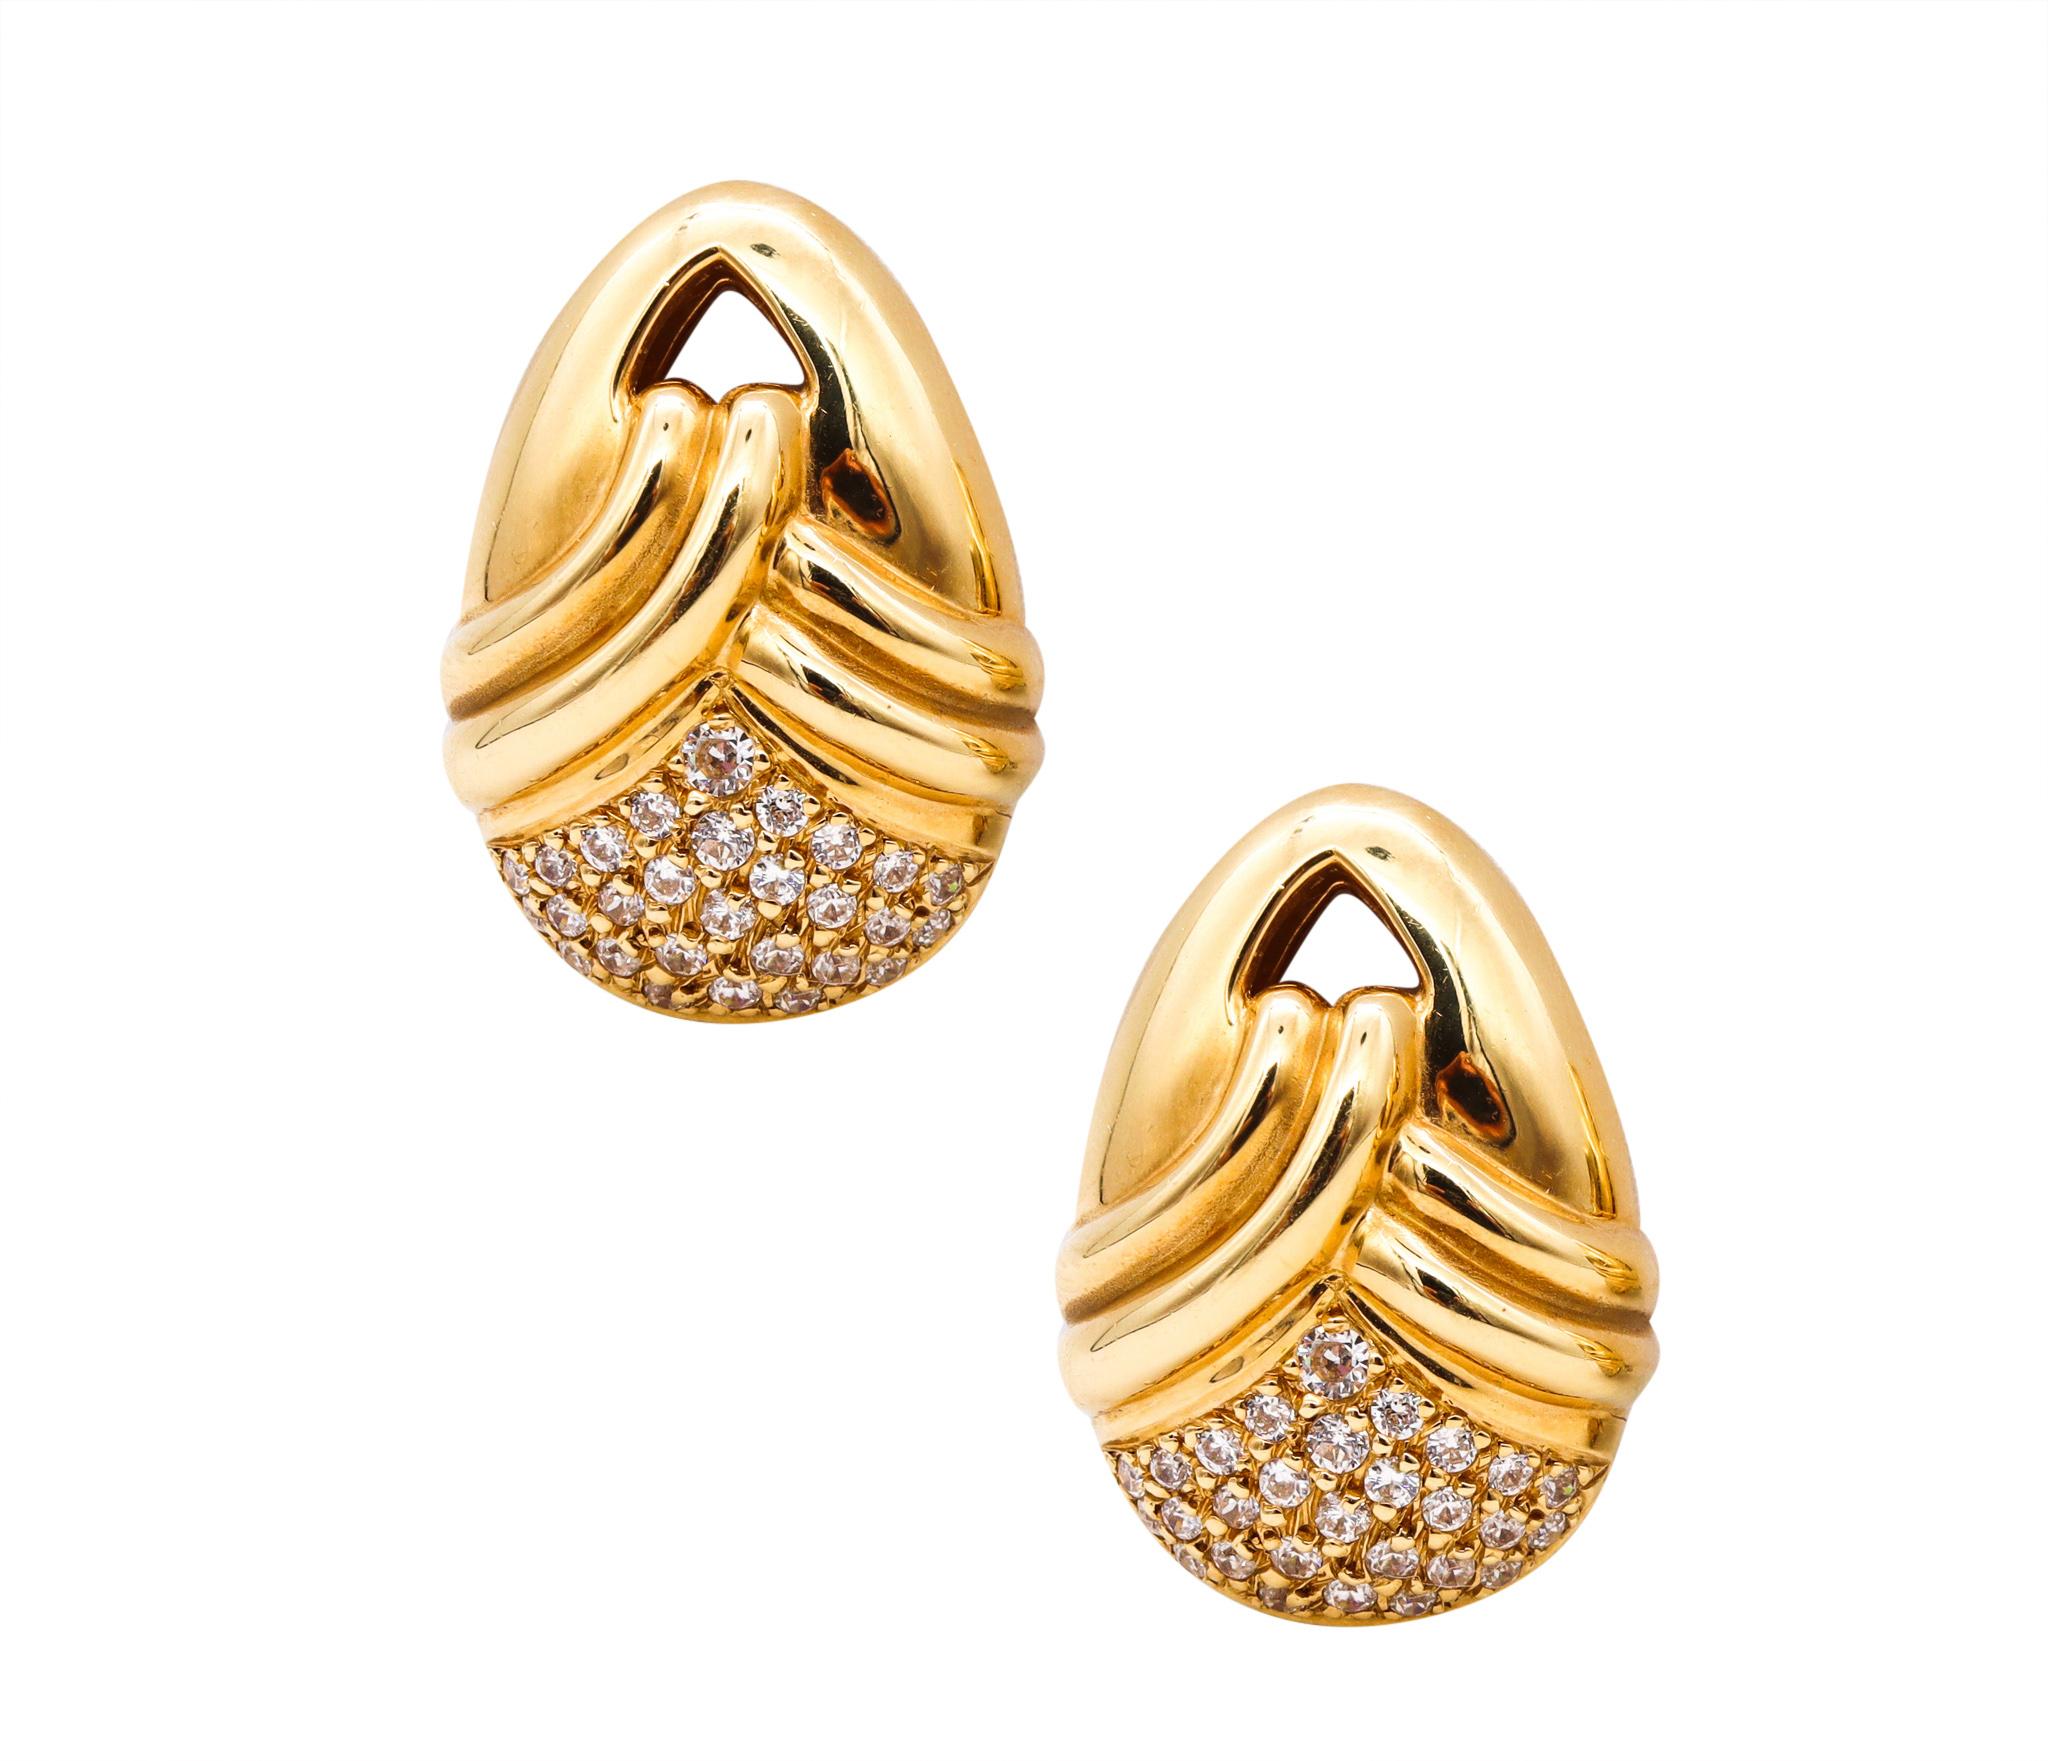 Pair of clips earrings designed by Michael Gates.

Gorgeous modern draped pair of clips-earrings, crafted in New York city in solid yellow gold of 18 karats, with high polished surfaces. Has been designed, with an ovoid shape with a drapery patterns